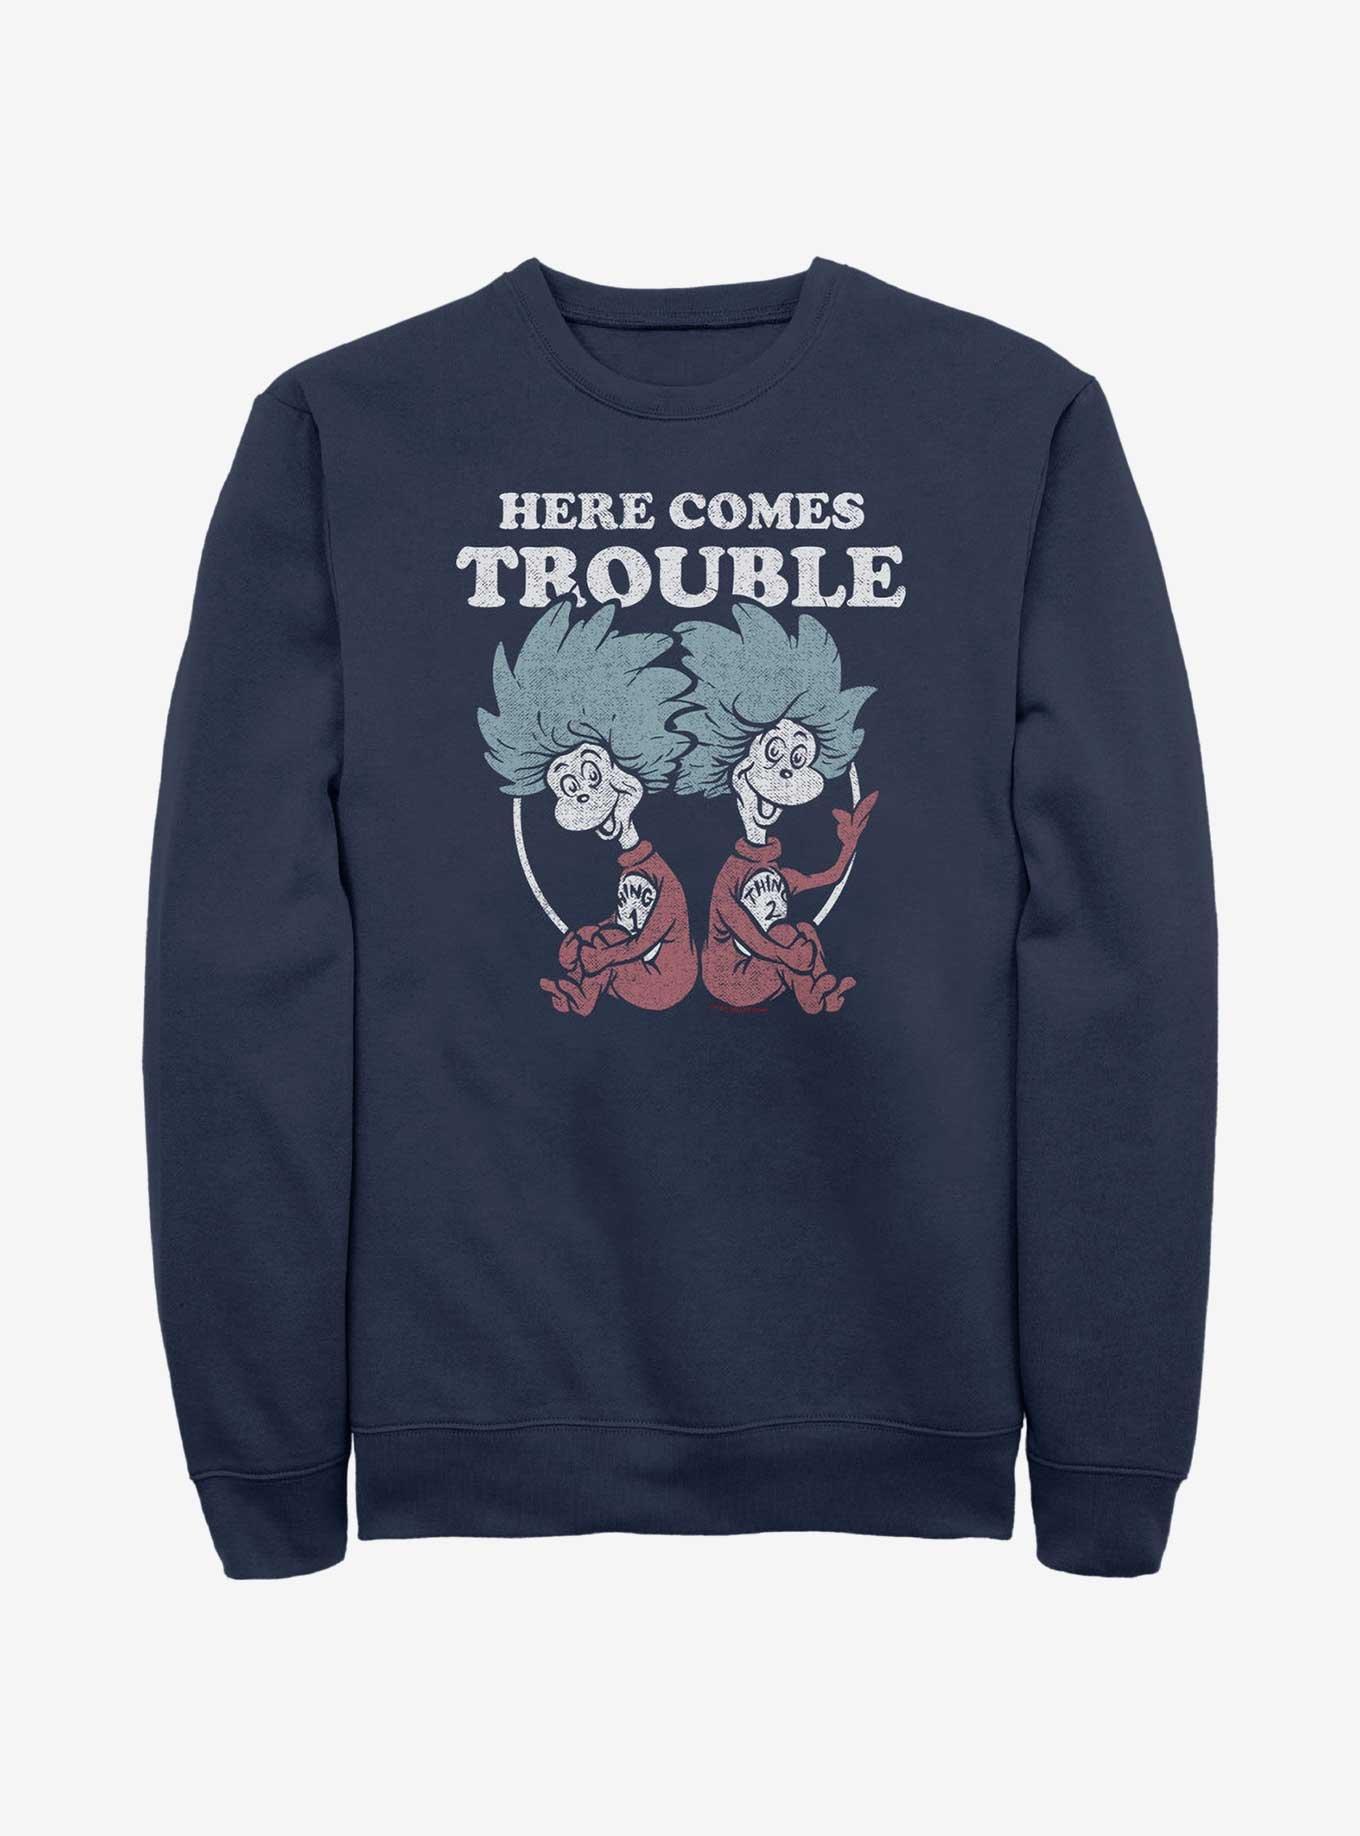 Dr. Seuss Thing 1 and Thing 2 Trouble Sweatshirt, NAVY, hi-res